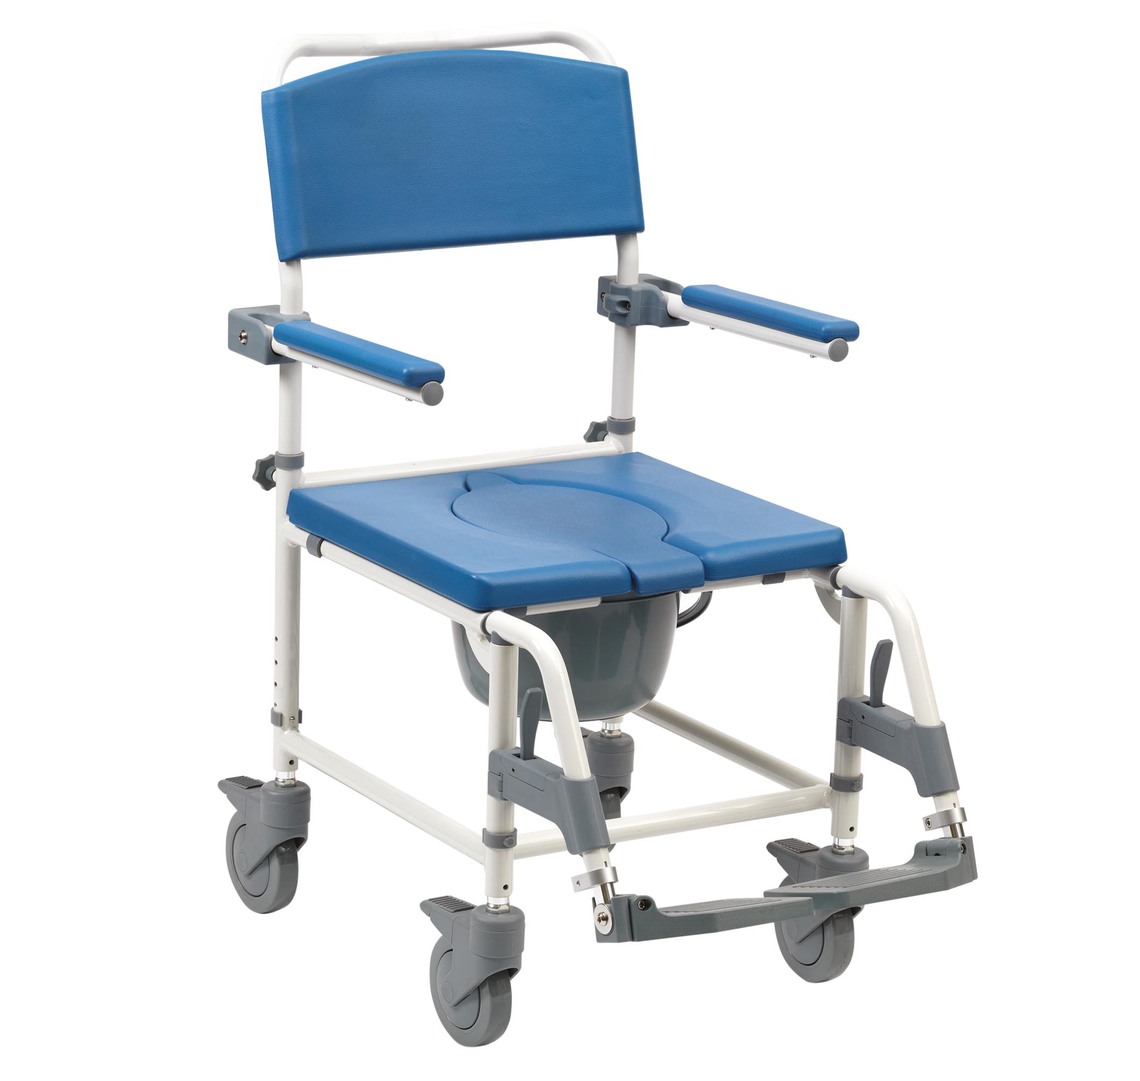 MOBILE SHOWER CHAIR / COMMODE